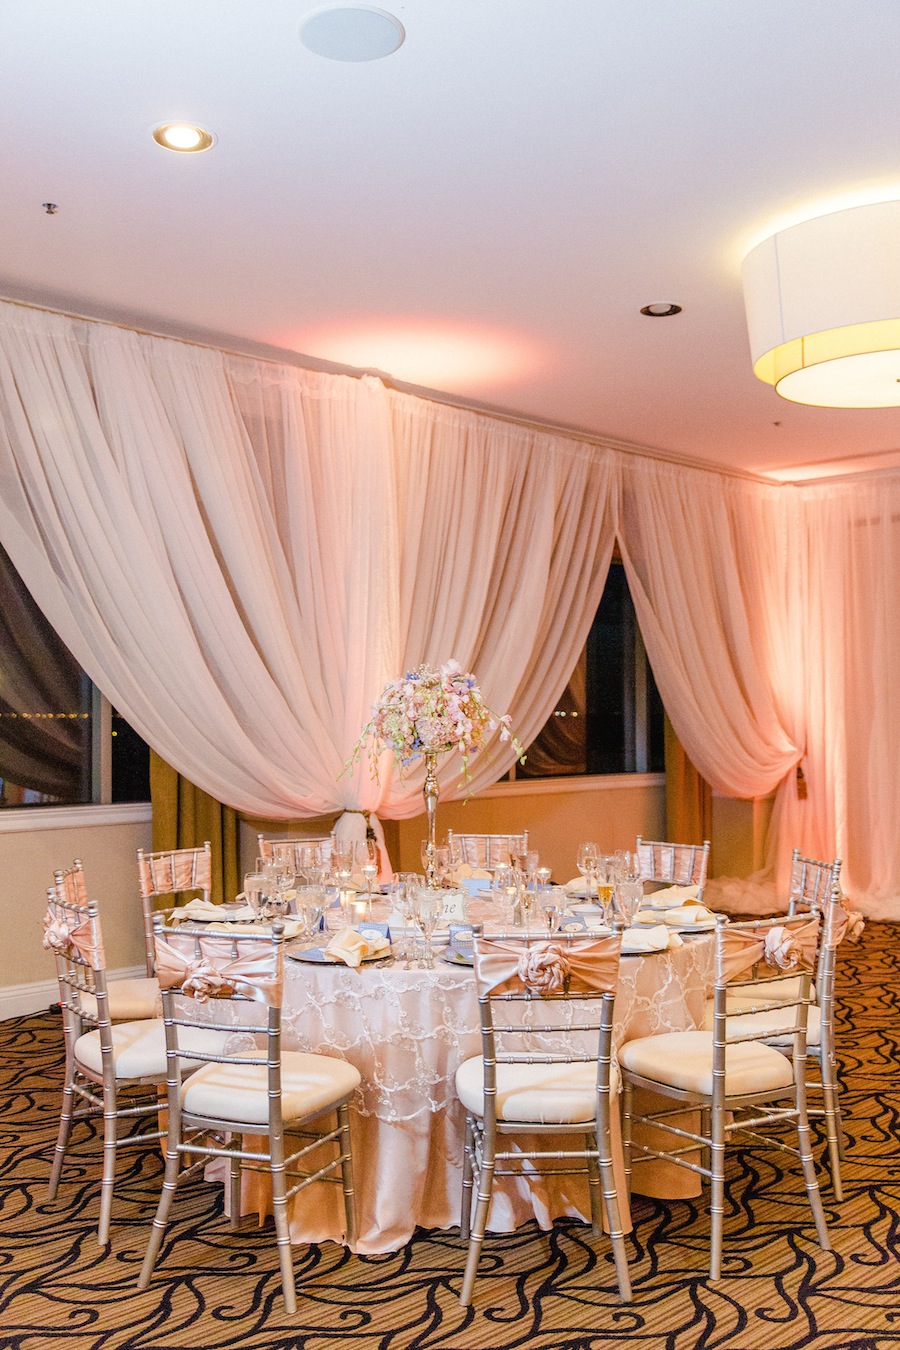 White Draping with Silver and Pink Wedding Decor | Tampa Wedding Venue the Centre Club Wedding Reception